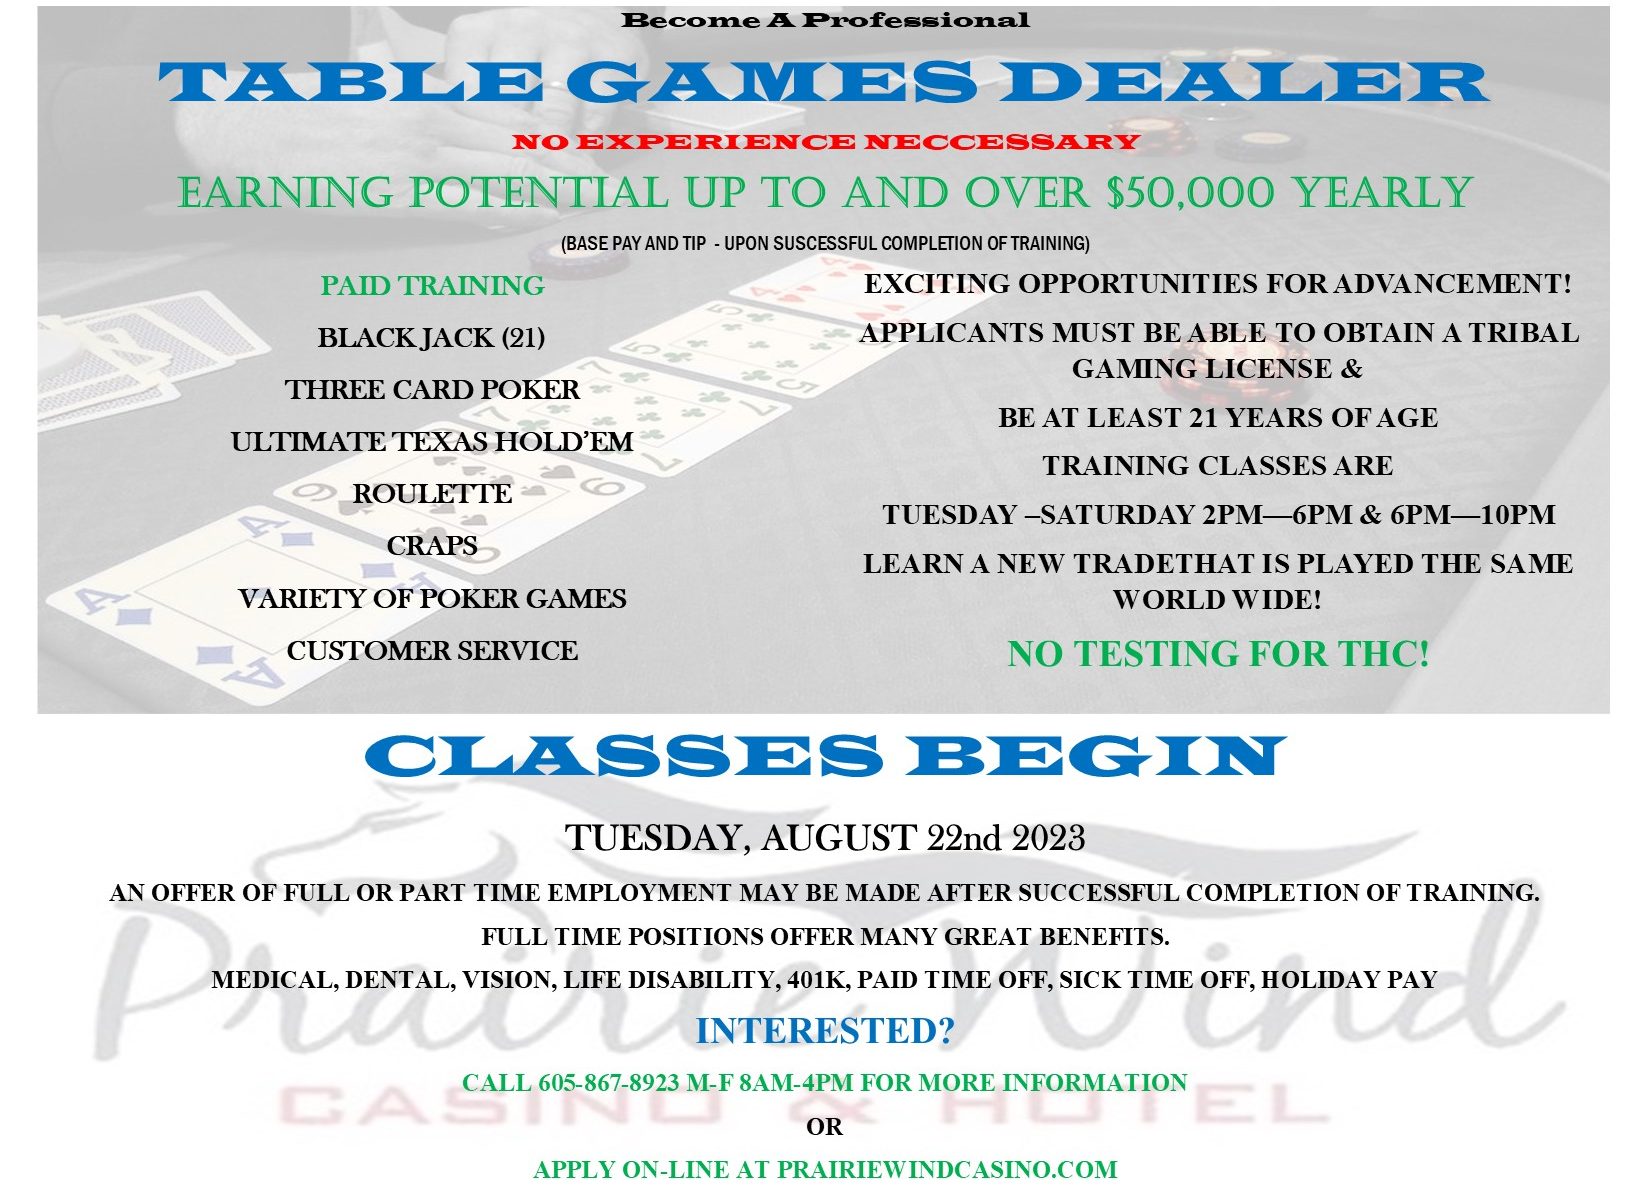 Table Games Dealer Wanted at Prairie Wind Casino